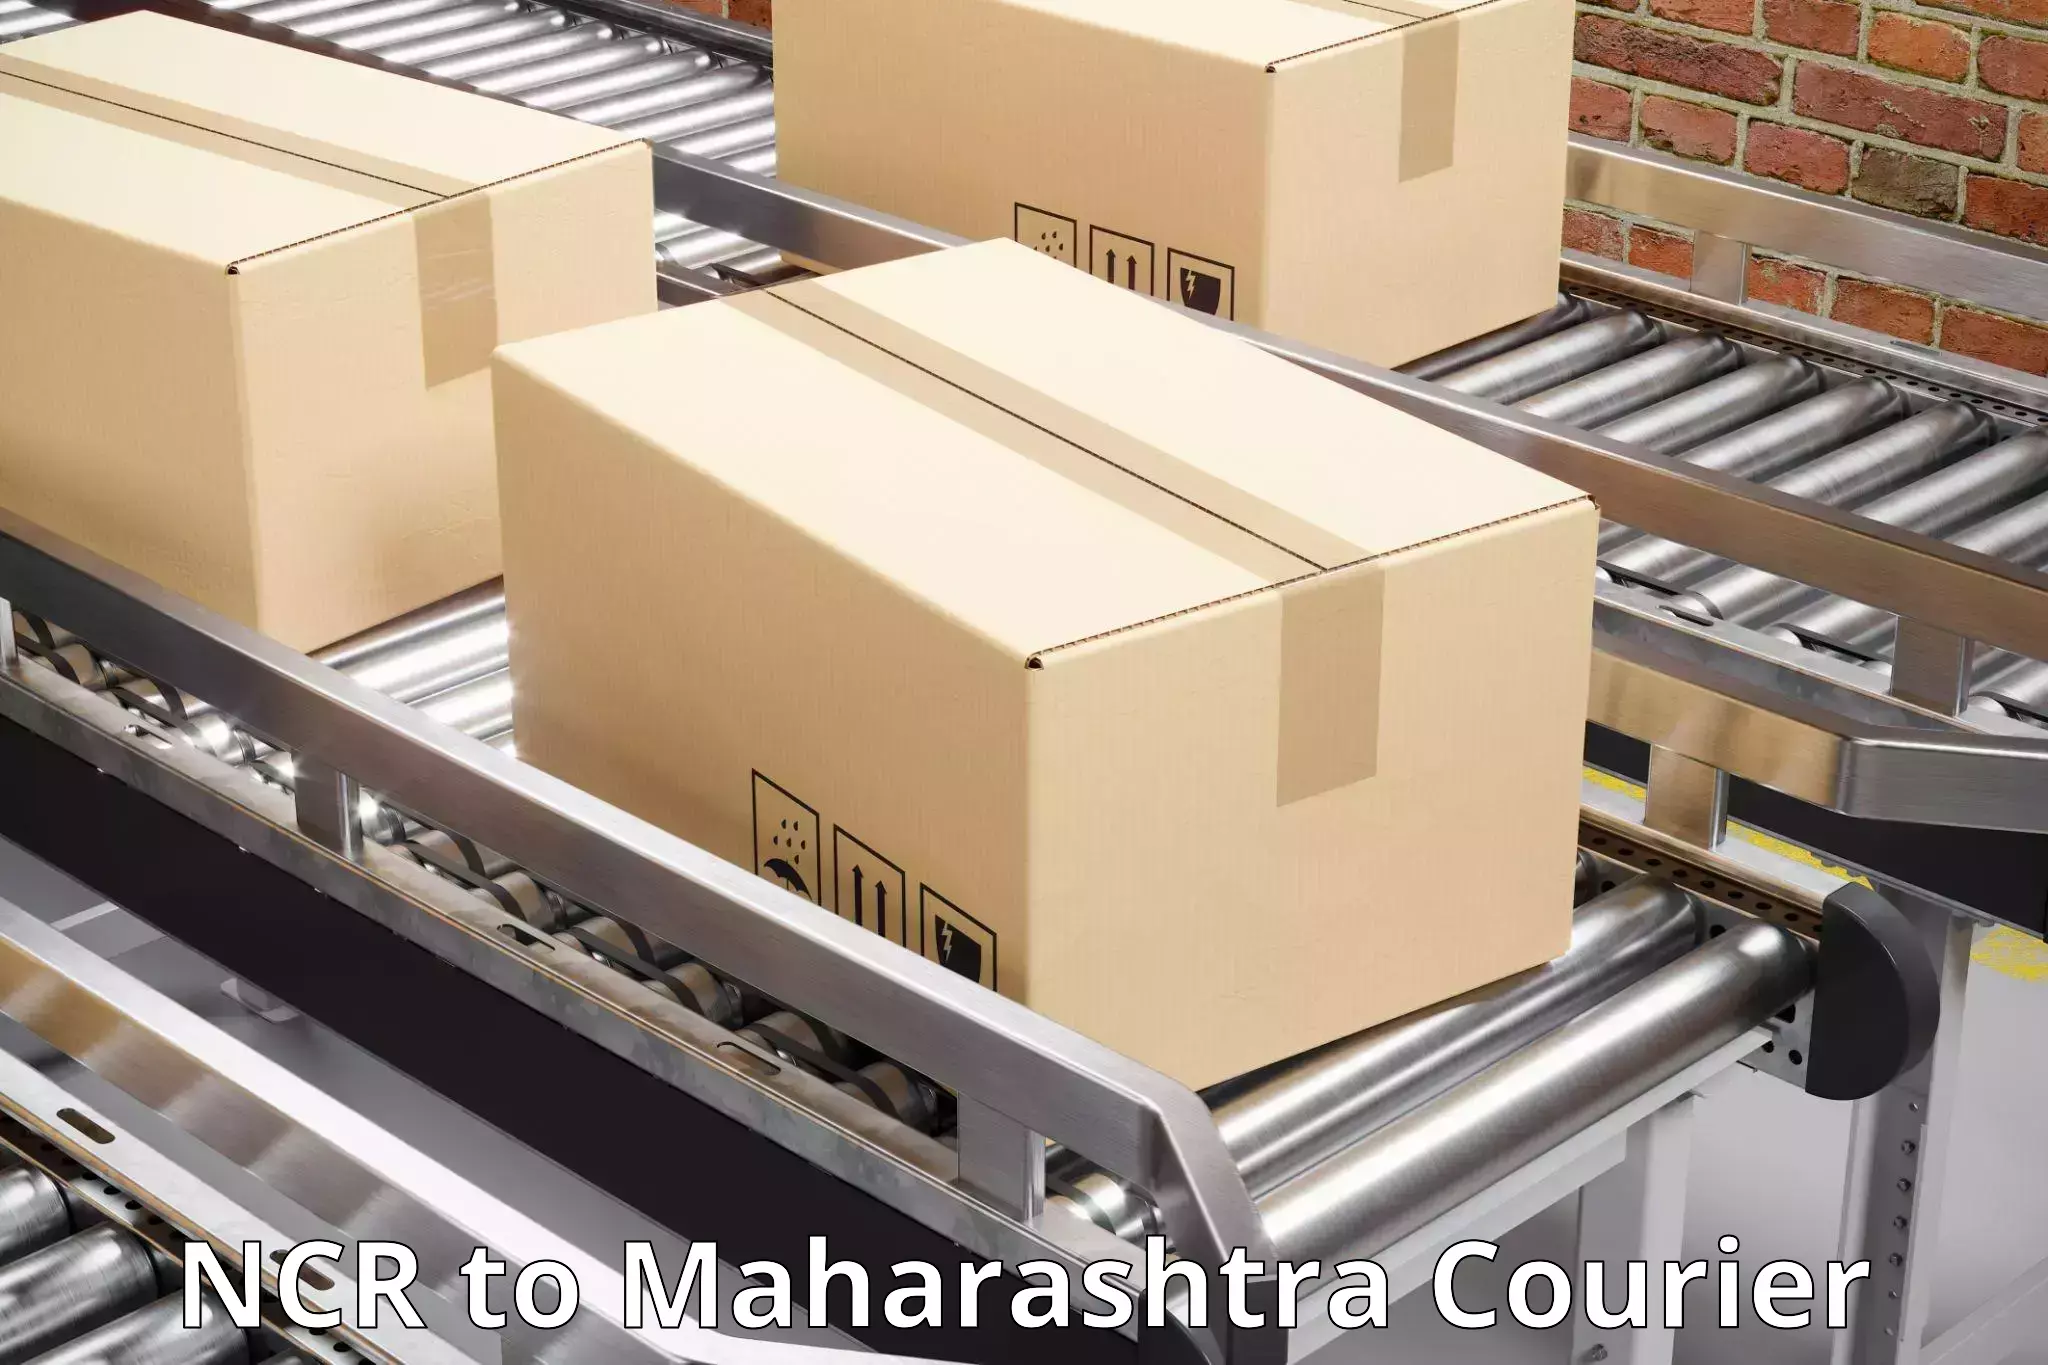 High-priority parcel service NCR to Pune